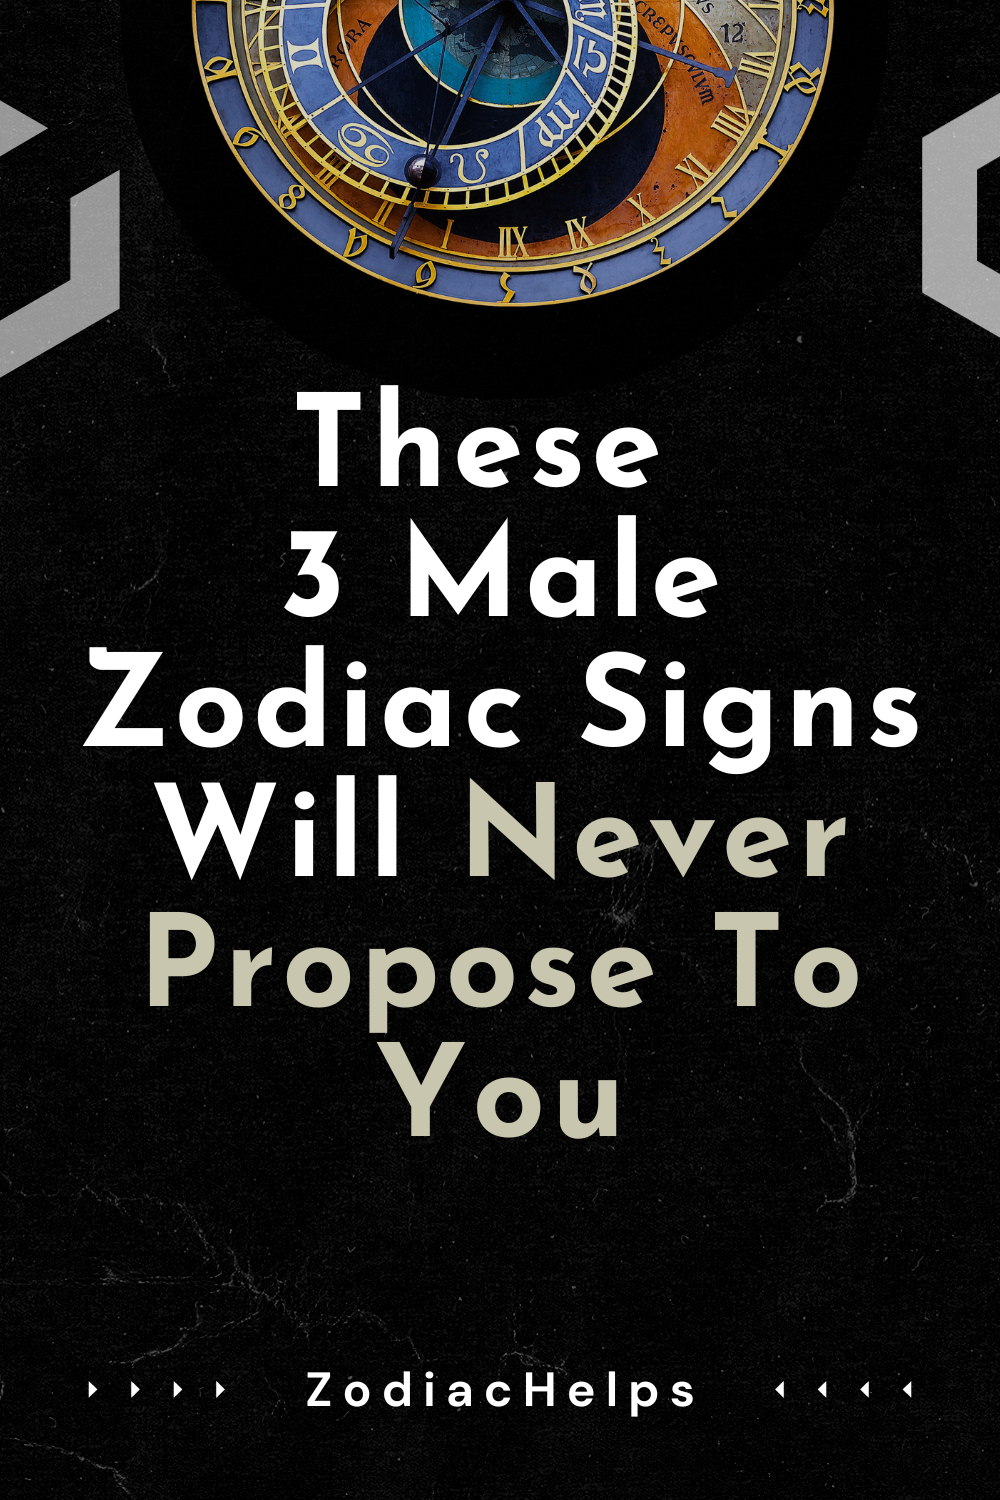 These 3 Male Zodiac Signs Will Never Propose To You